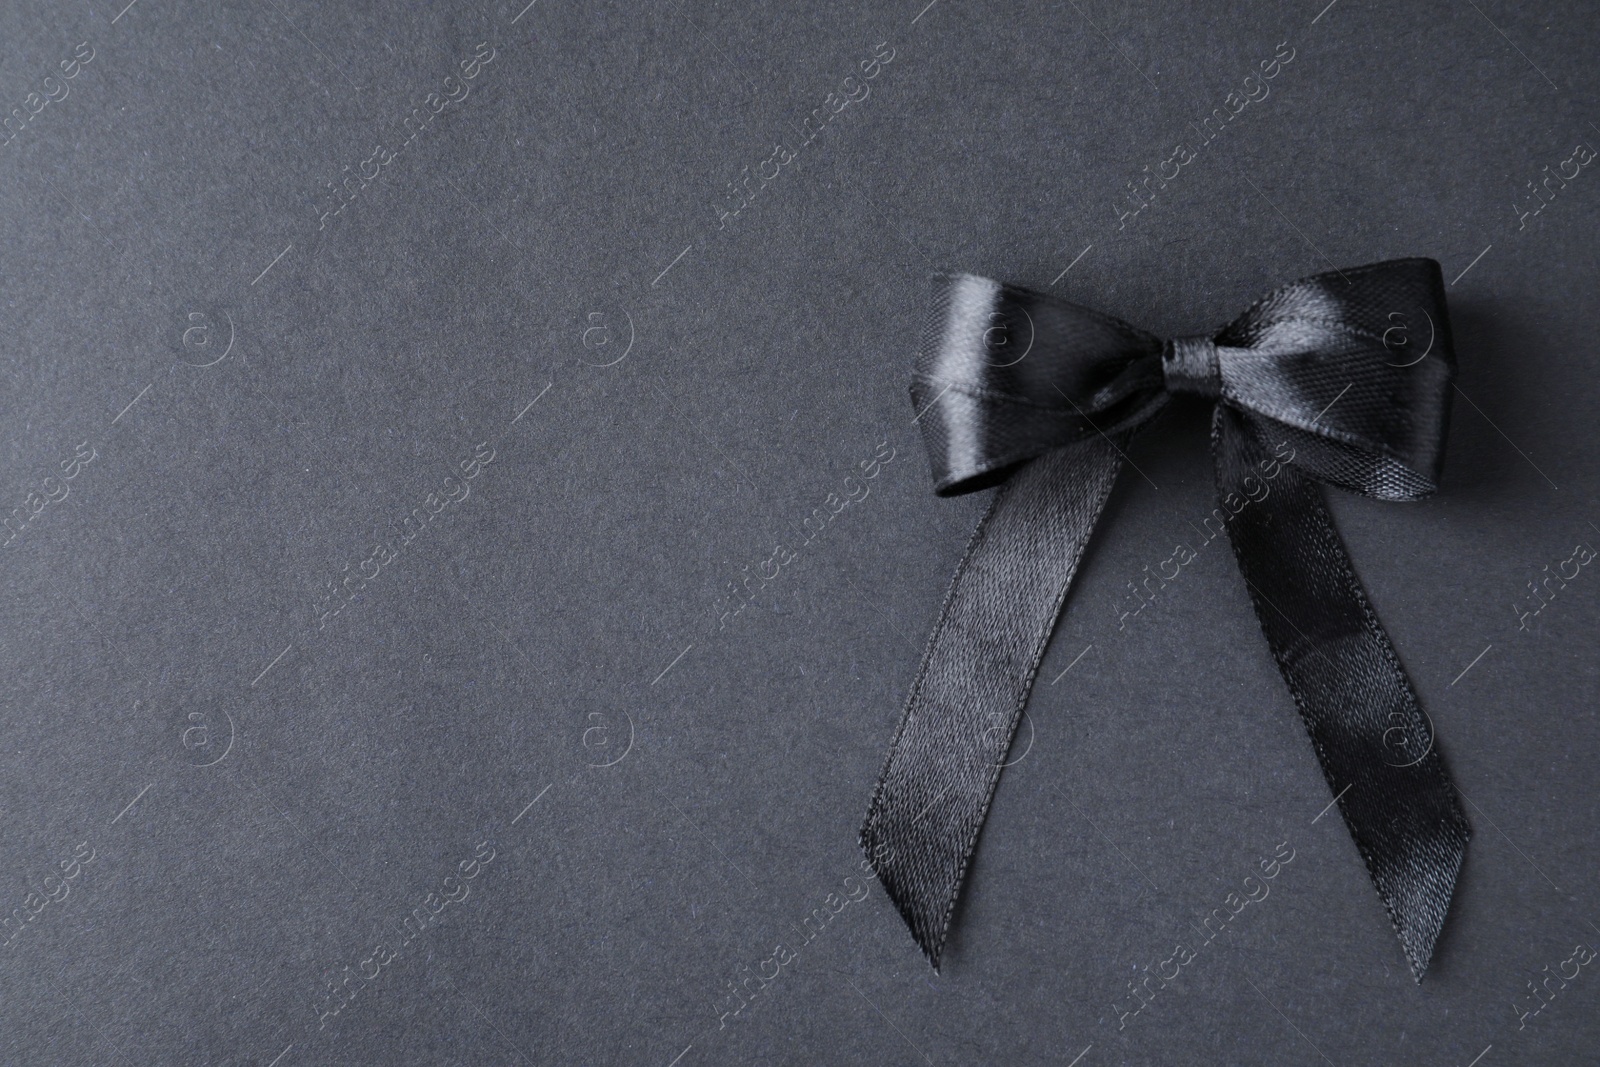 Photo of Black ribbon bow on dark background, top view with space for text. Funeral symbol